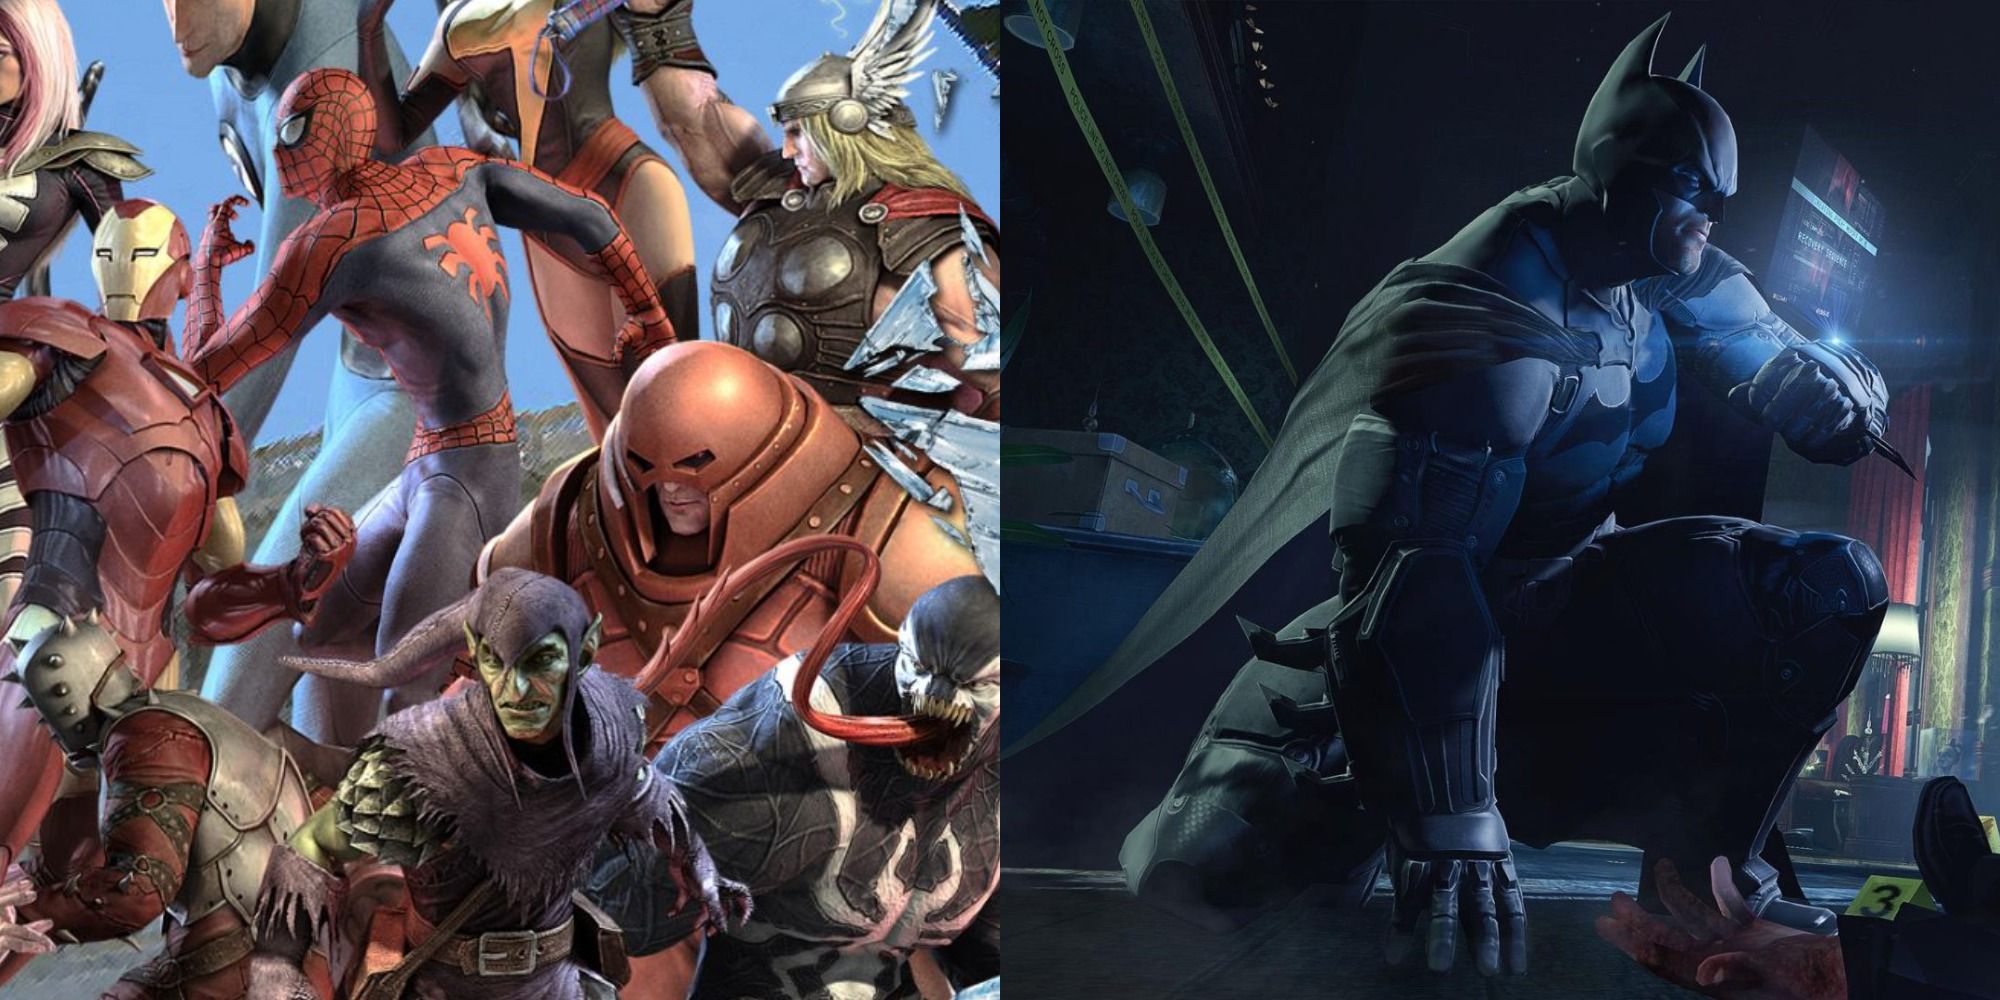 Split image of heroes and villains in Ultimate Alliance 2 and Batman at a crime scene in Batman Arkham Origins